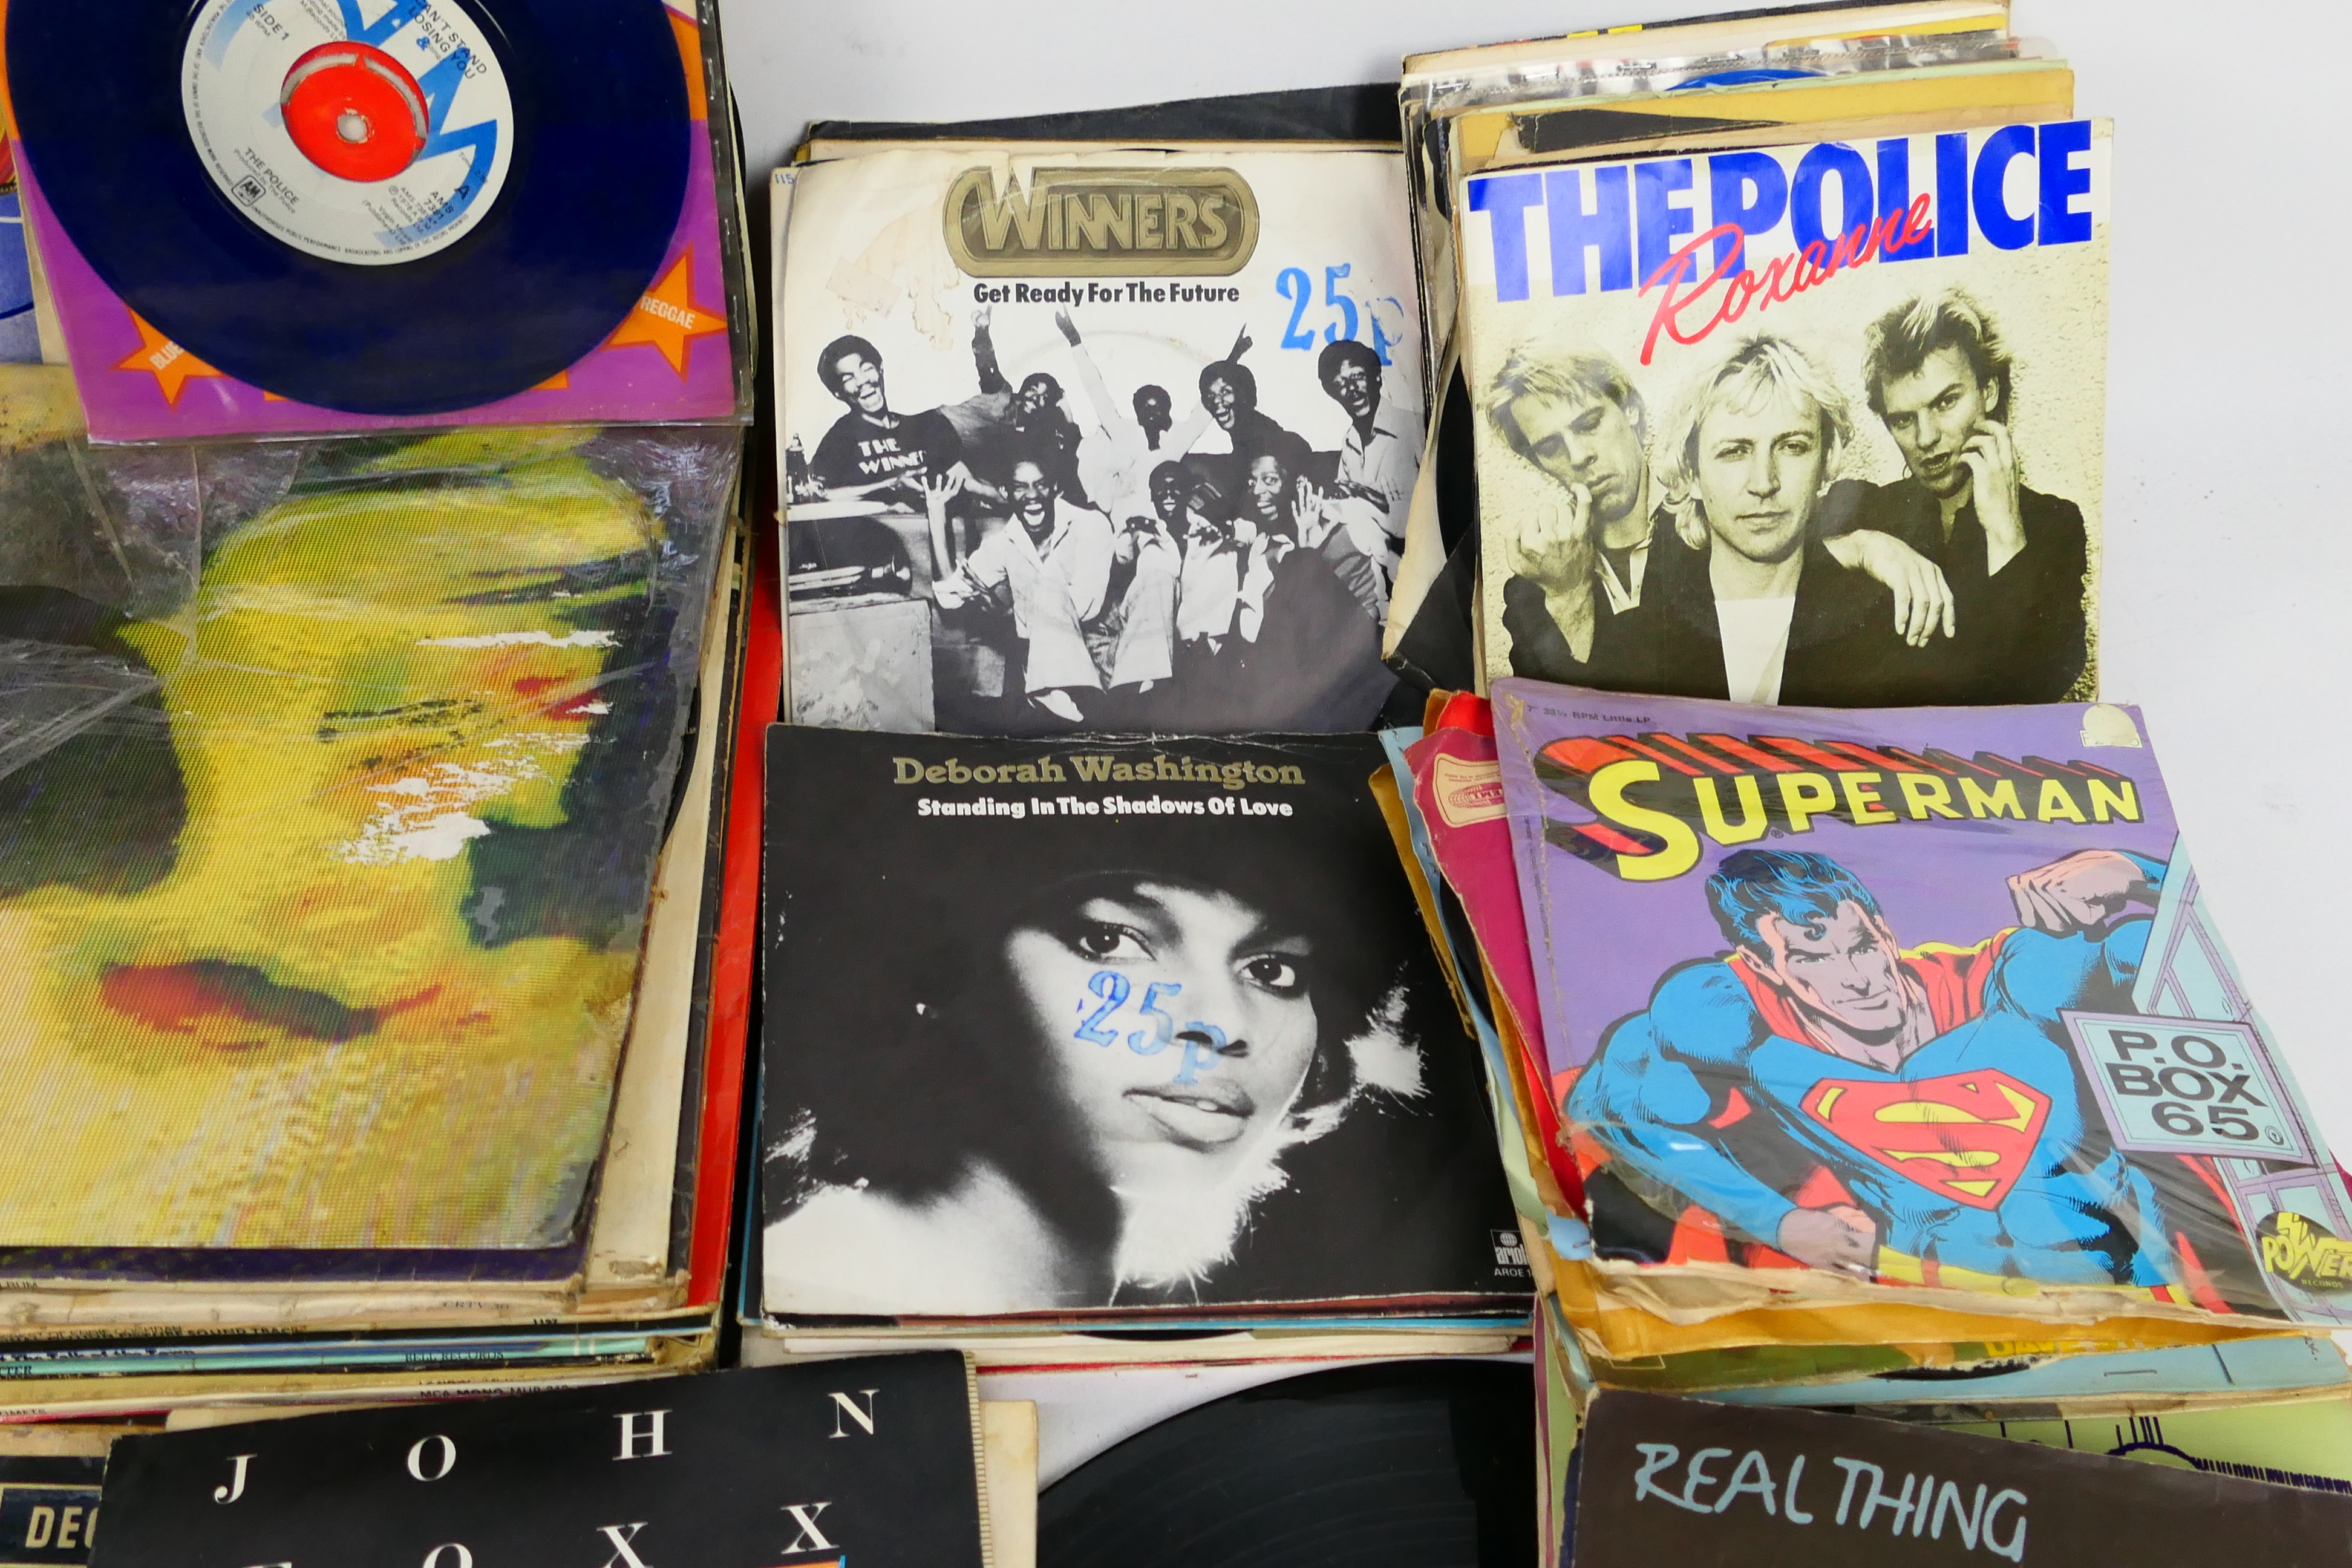 A quantity of 7" and 12" vinyl records to include The Beatles, The Rolling Stones, David Bowie, - Image 6 of 6